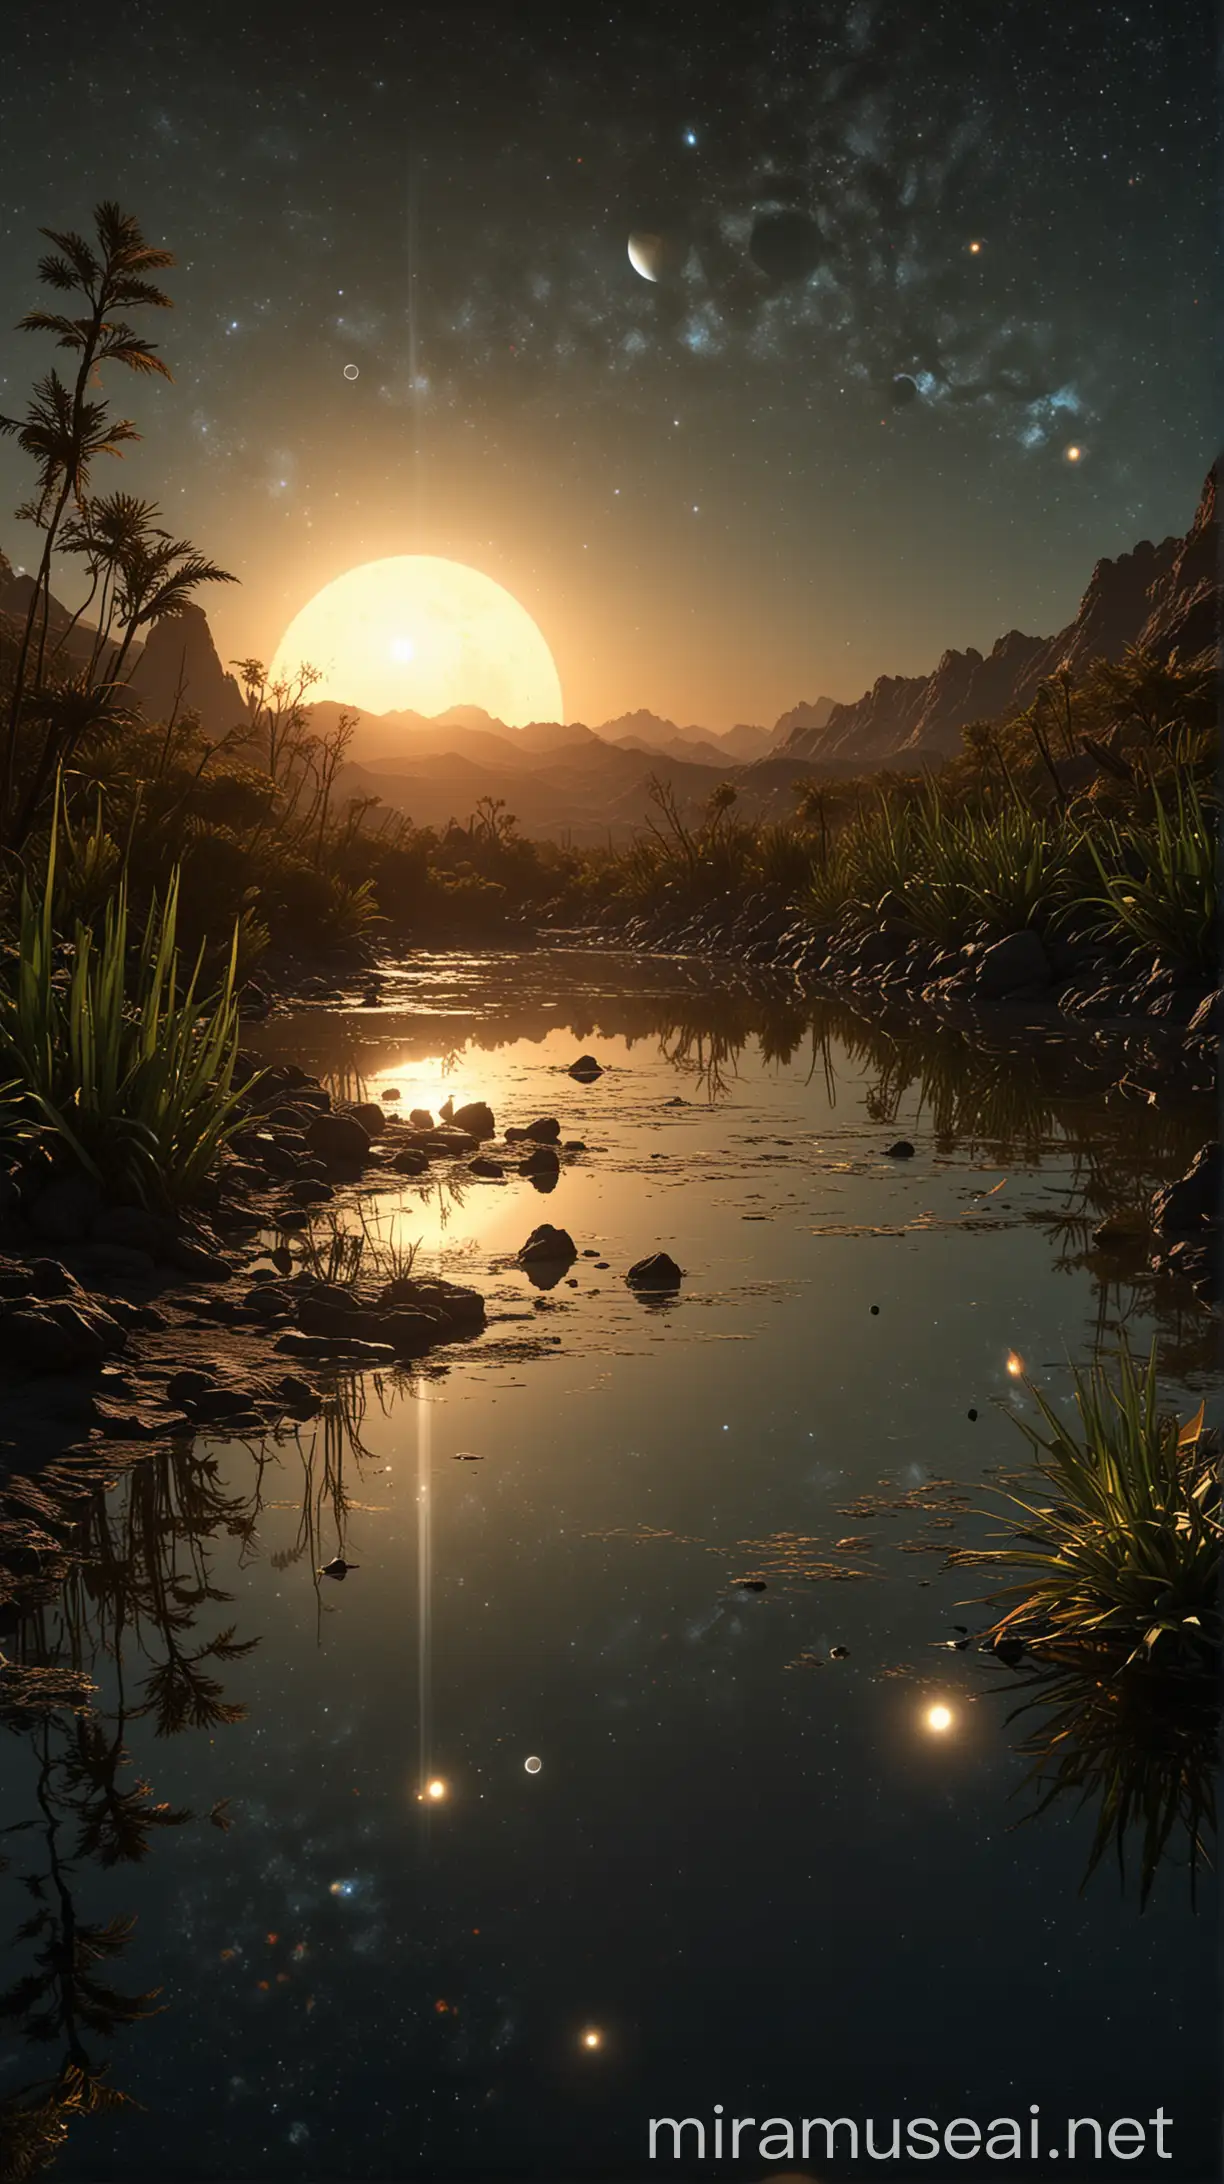 Kepler-16b with Twin Sunrises:

Description: An awe-inspiring scene of Kepler-16b, showing two suns rising simultaneously, illuminating the planet's surface with a dual glow. Include an alien vegetation and a calm, reflective body of water.